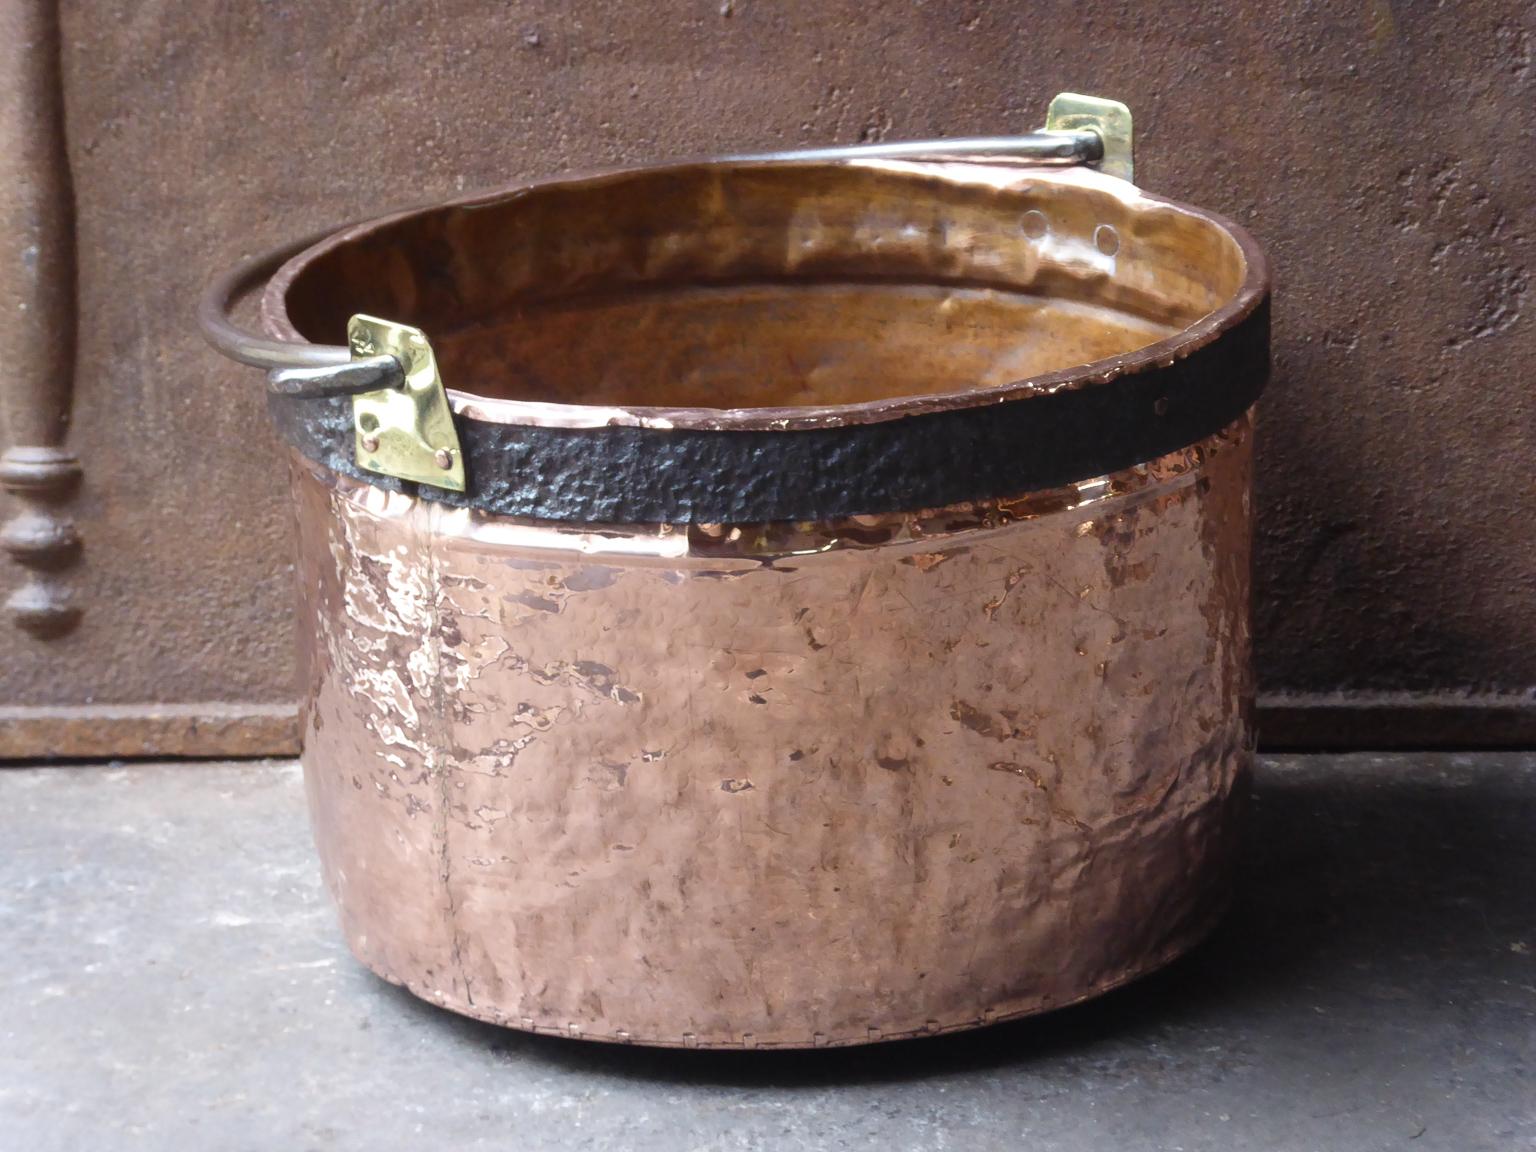 18th century French Louis XV firewood basket holder. The log holder is made of polished copper with a wrought iron handle. The log holder is in a good condition and is fully functional.